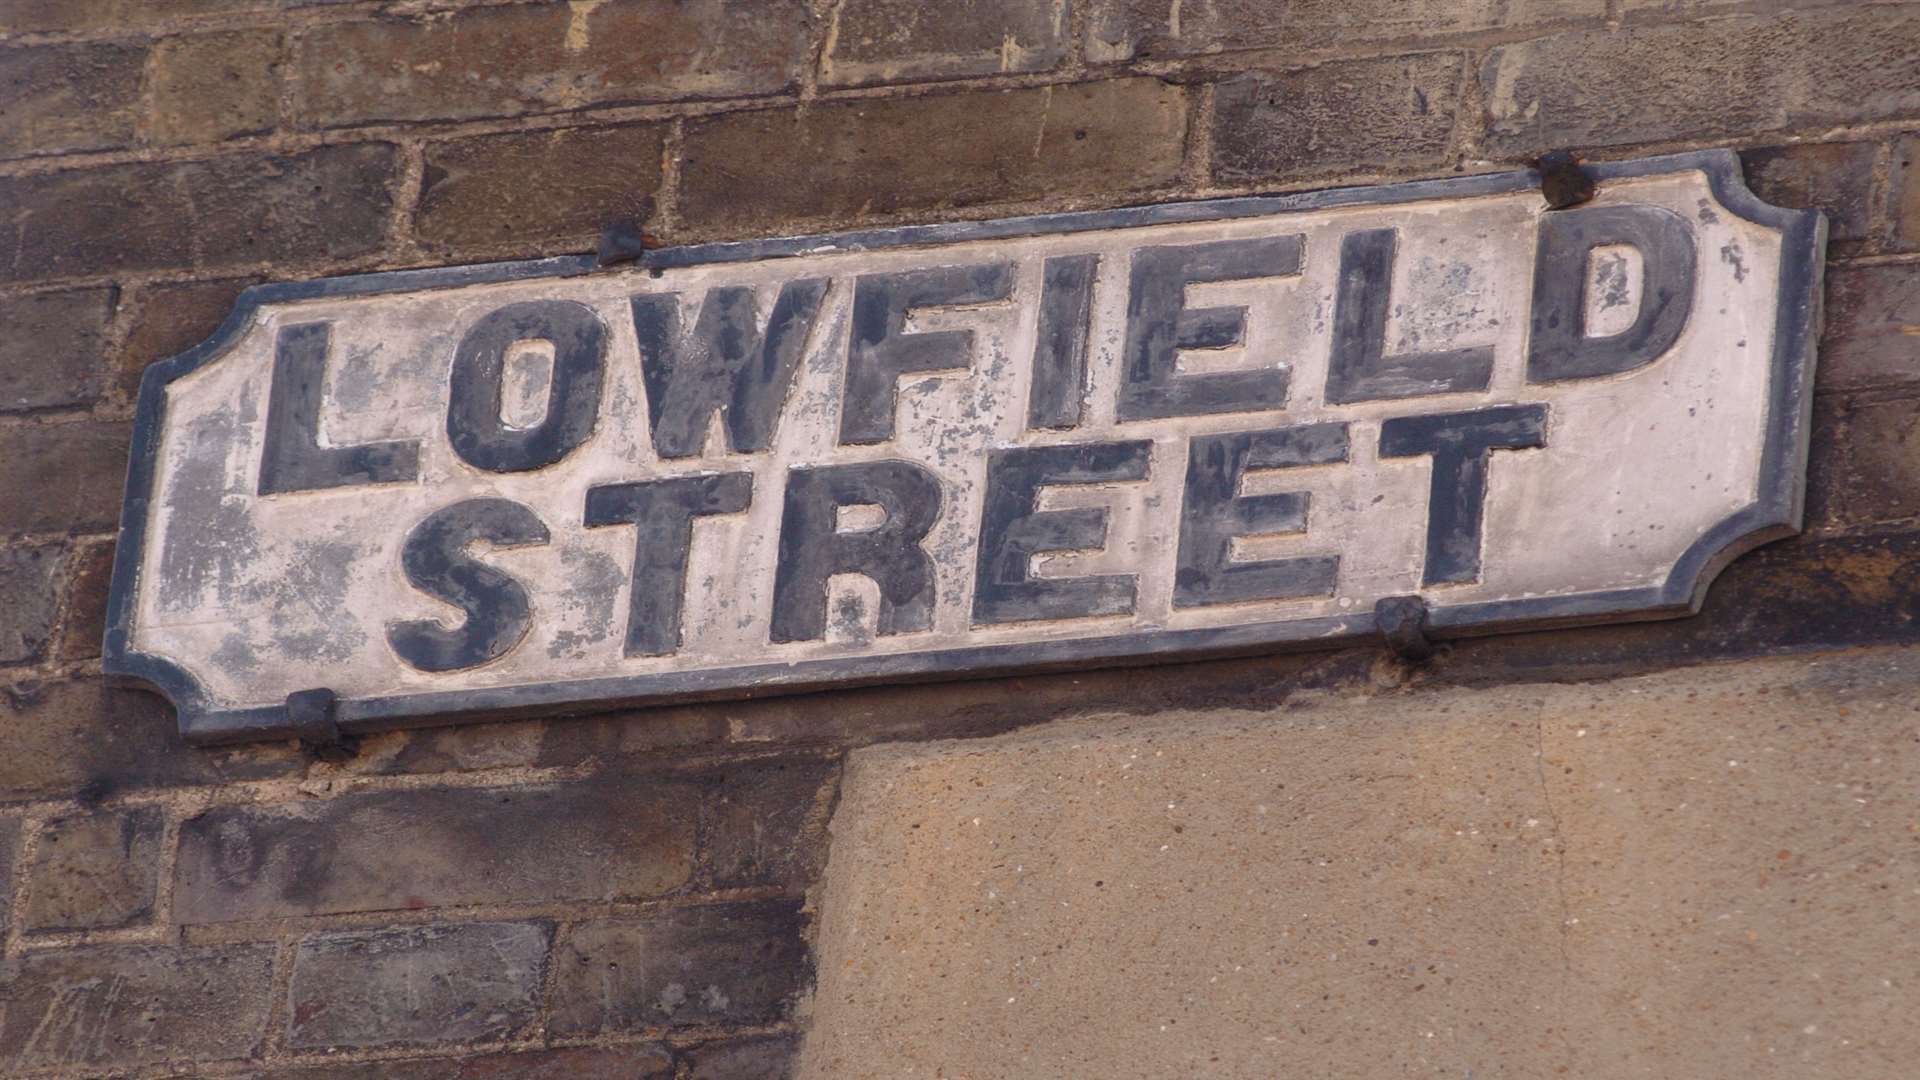 The street sign